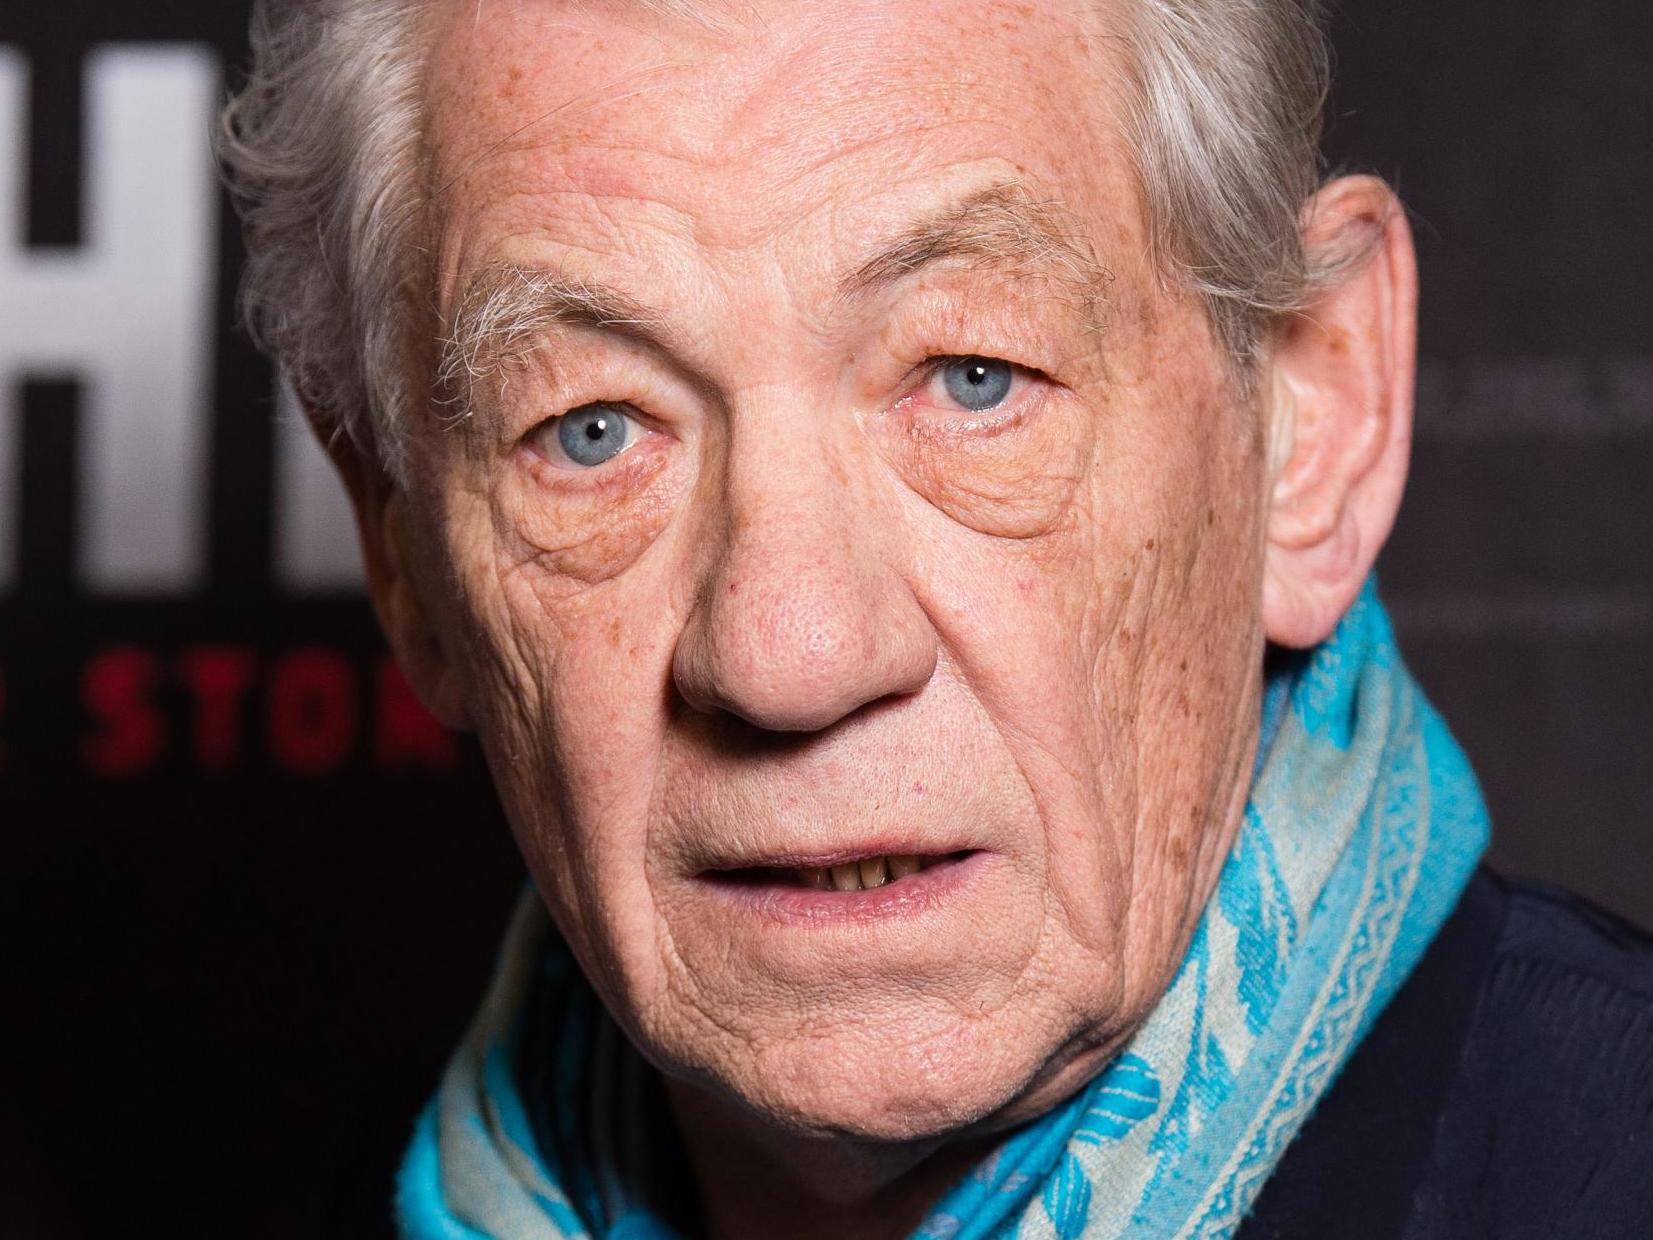 Homosexual actor Ian McKellen apologises for comments on pederasty ...